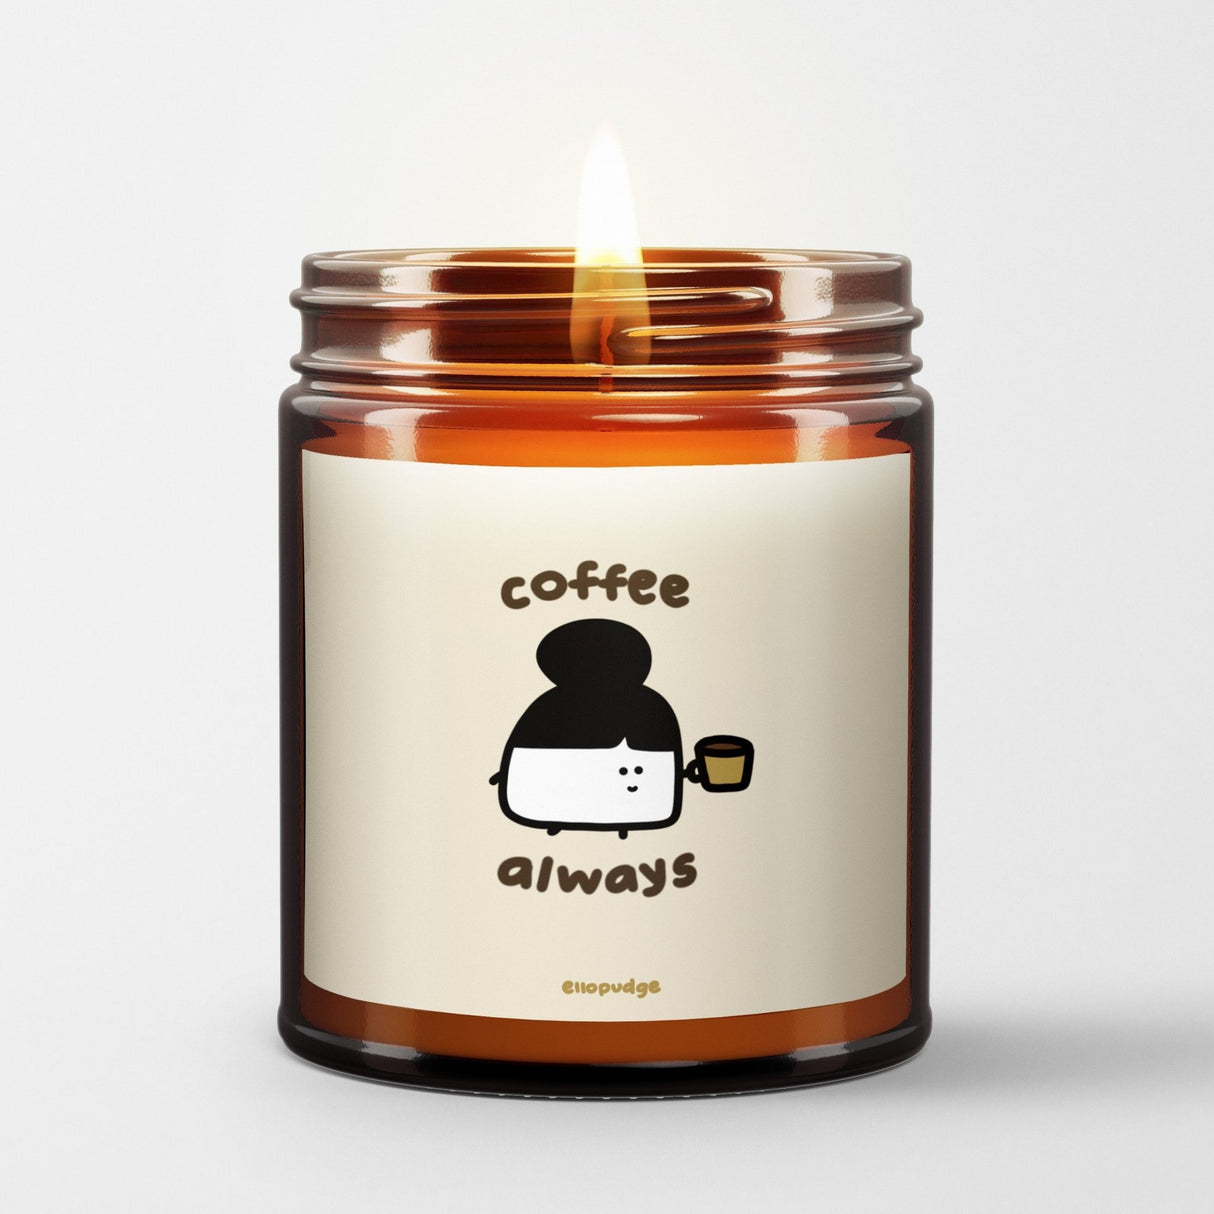 Ellopudge Scented Candle in Amber Glass Jar: Coffee Always - Candlefy